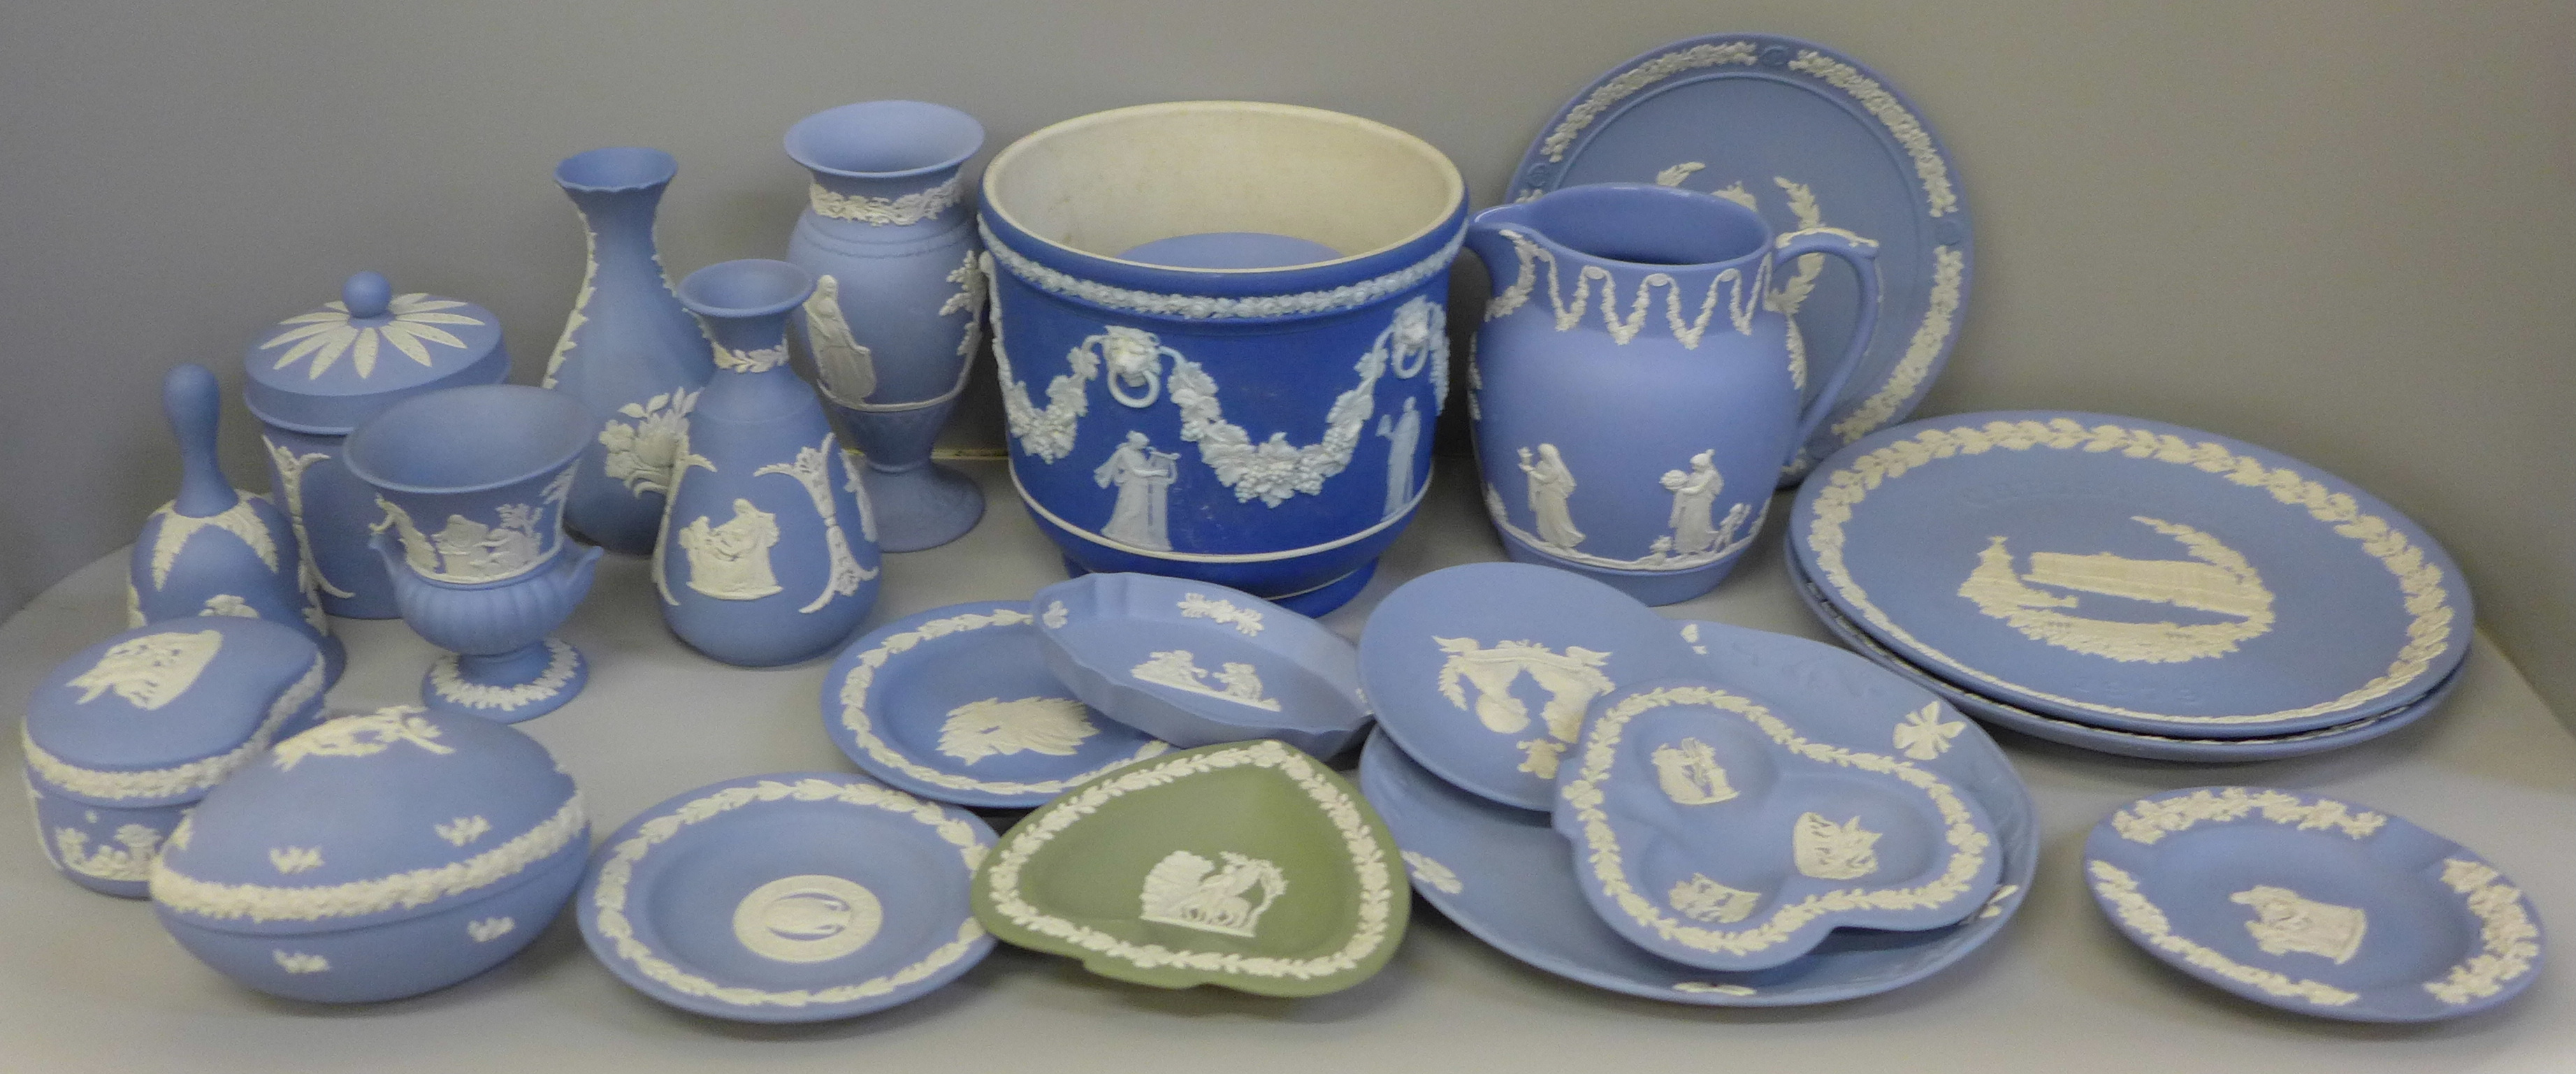 A box of approximately 20 items of Wedgwood Jasperware including a jardiniere, jug, vases, lidded